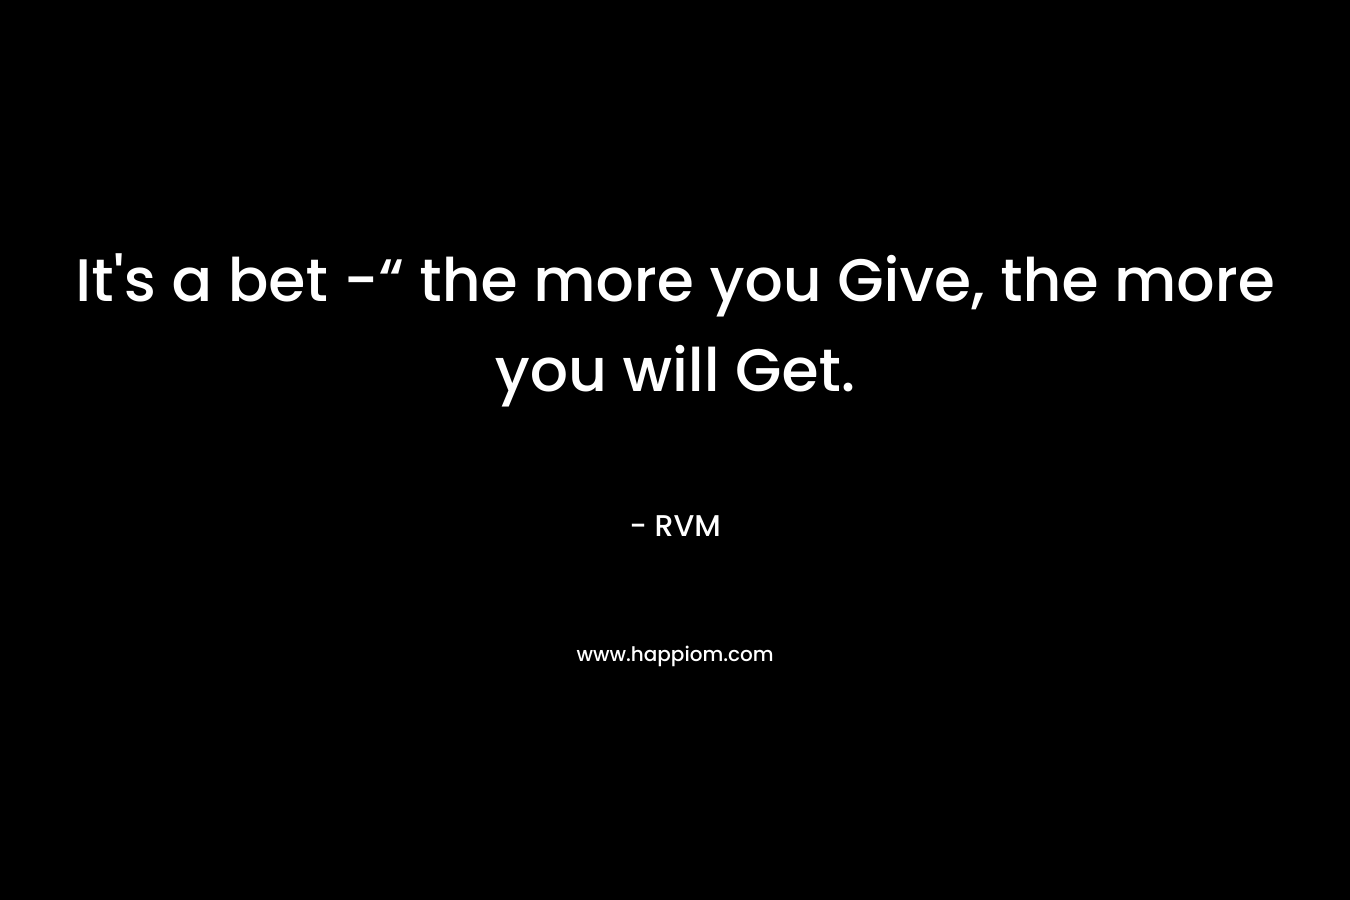 It's a bet -“ the more you Give, the more you will Get.